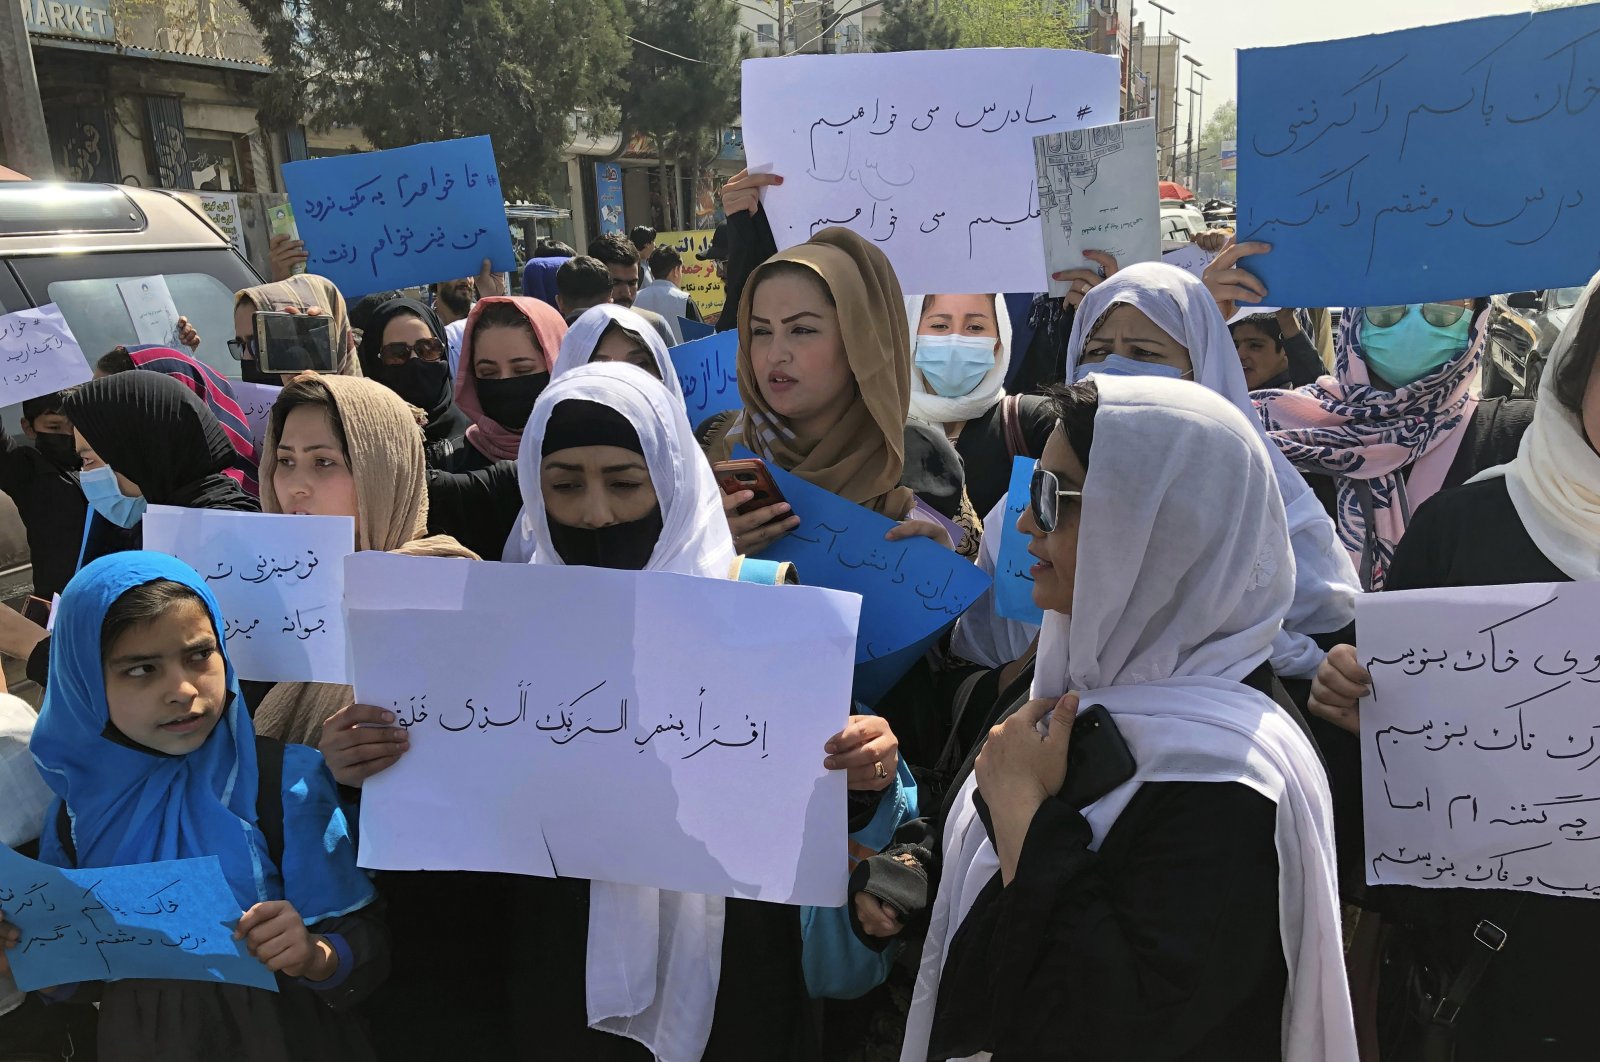 Afghan women chant and hold signs of protest during a demonstration in Kabul, Afghanistan, March 26, 2022. (AP Photo)